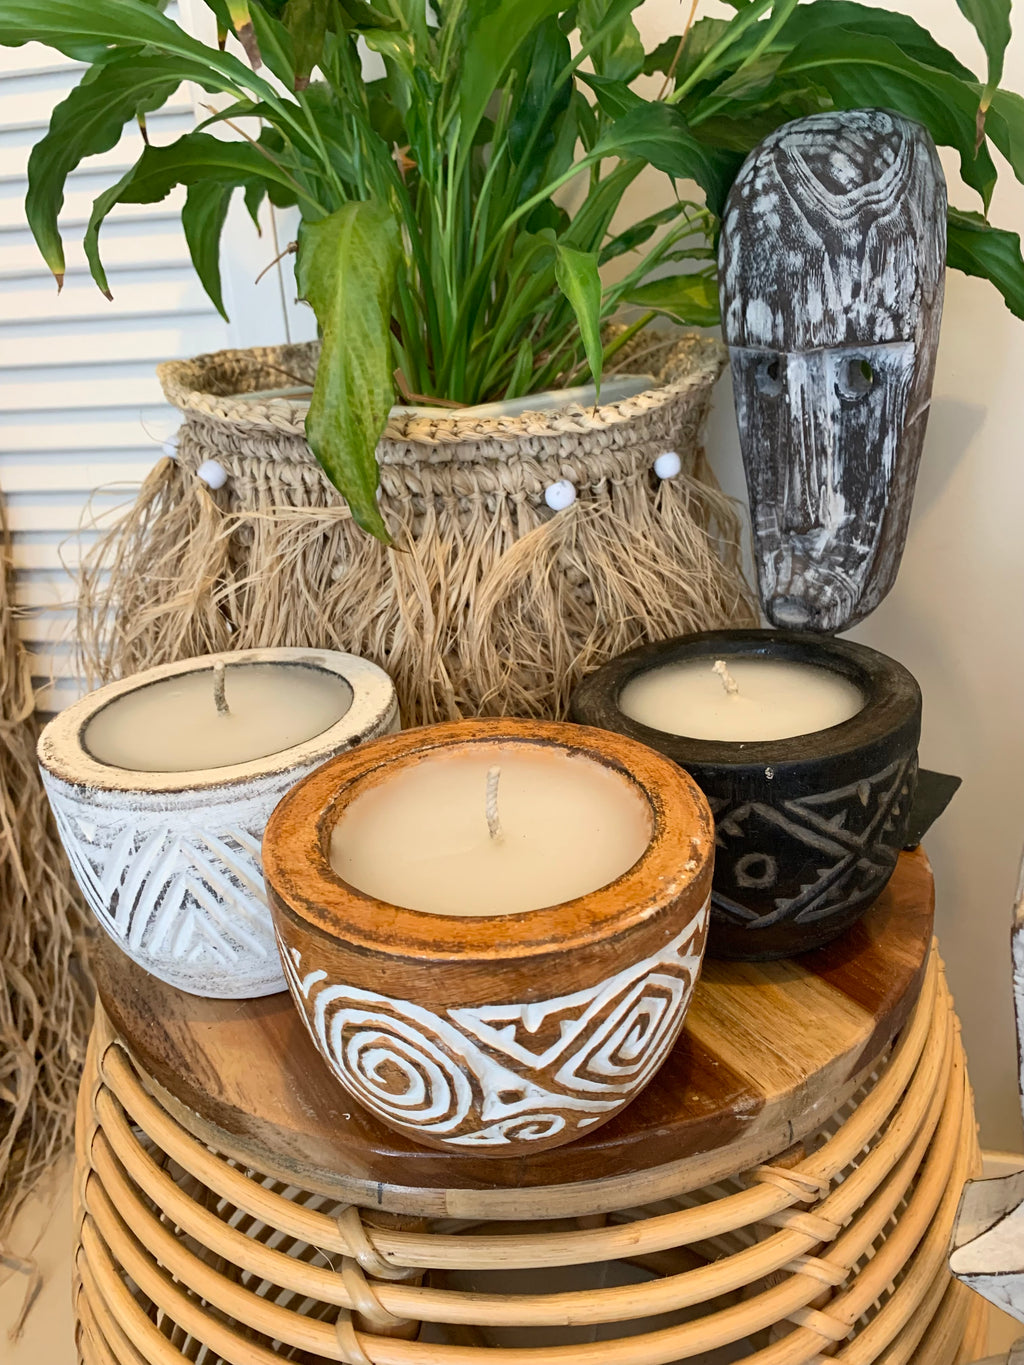 Handcarved timber candle. Available in black or white. $25 each